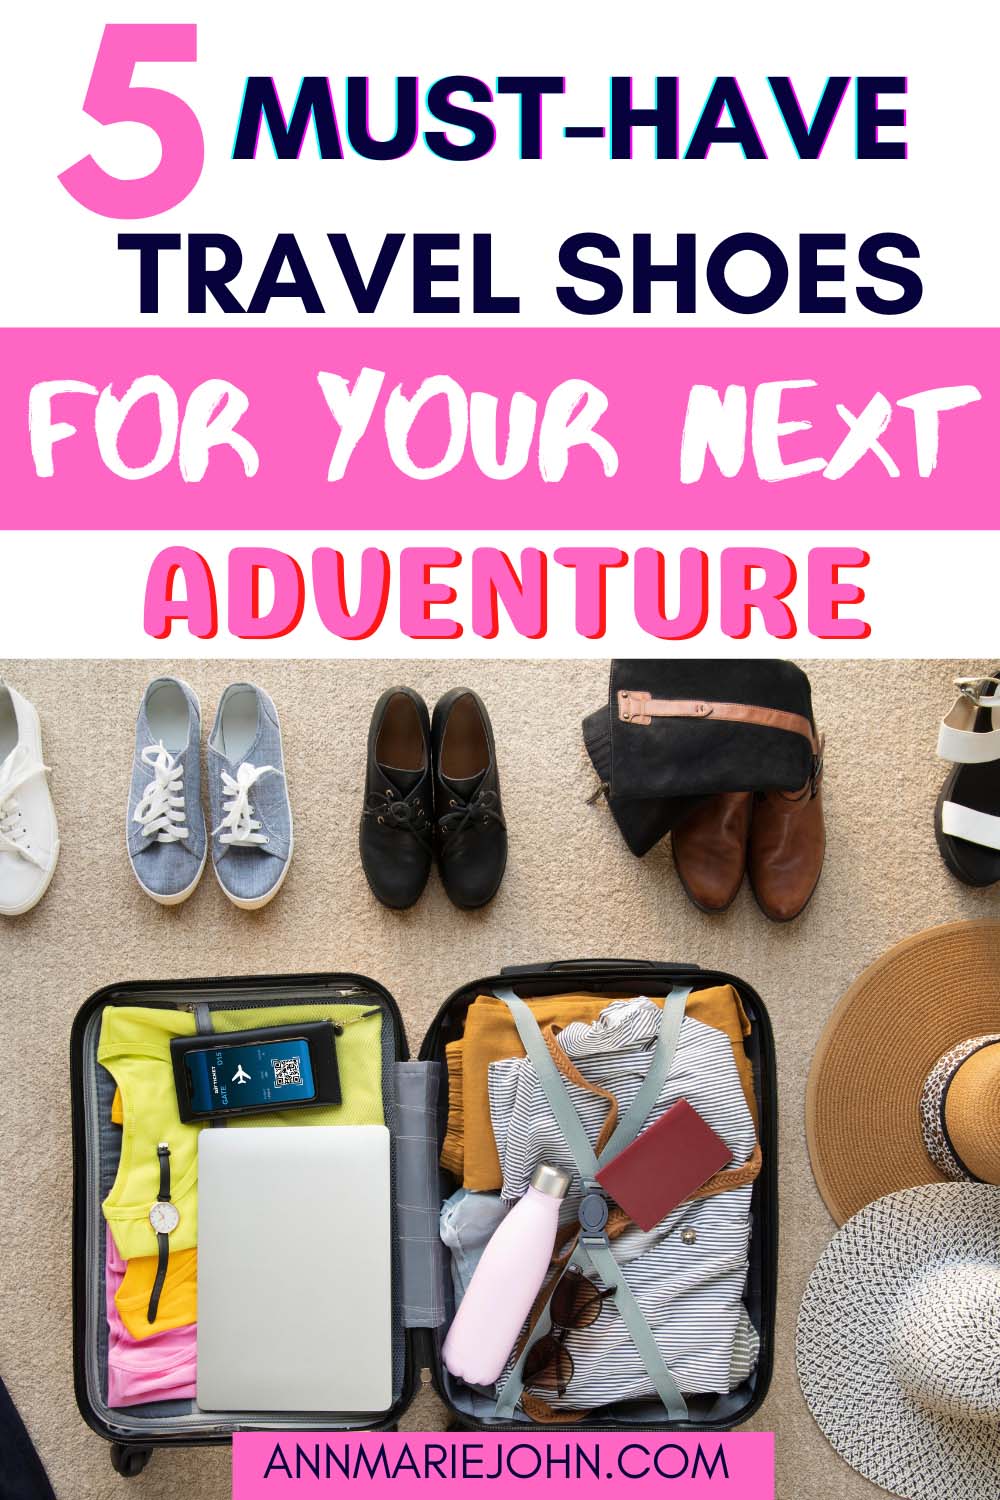 Must-Have Travel Shoes